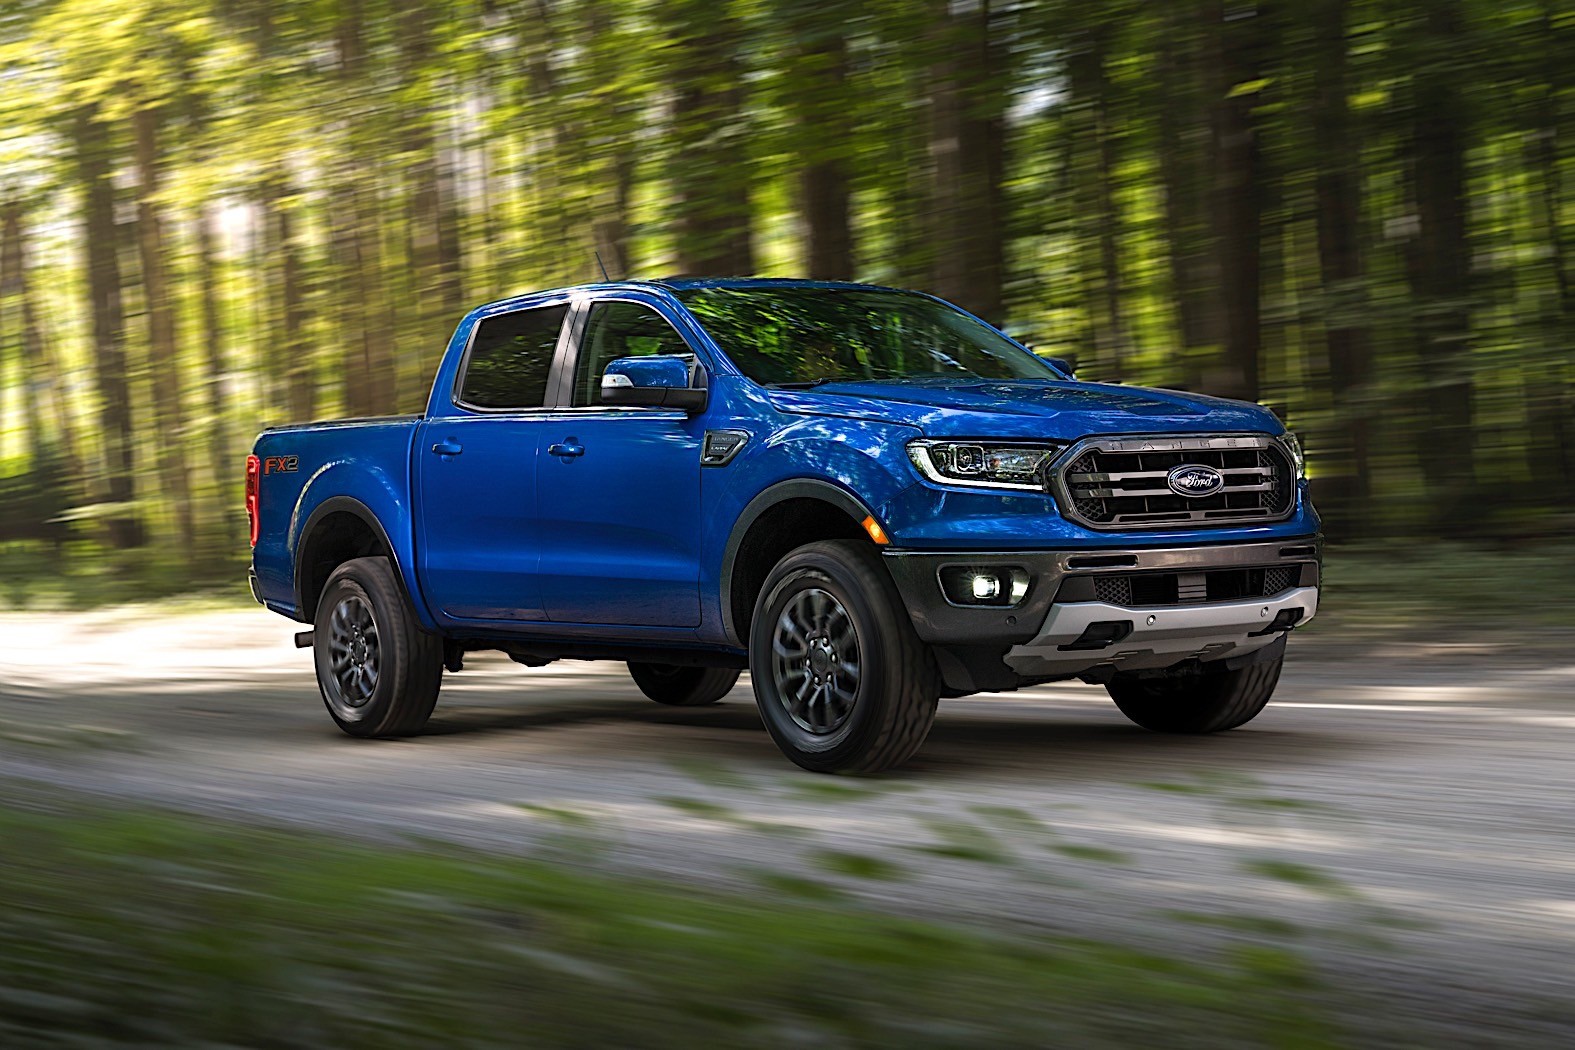 2020-ford-ranger-welcomes-fx4-special-edition-in-australia-autoevolution